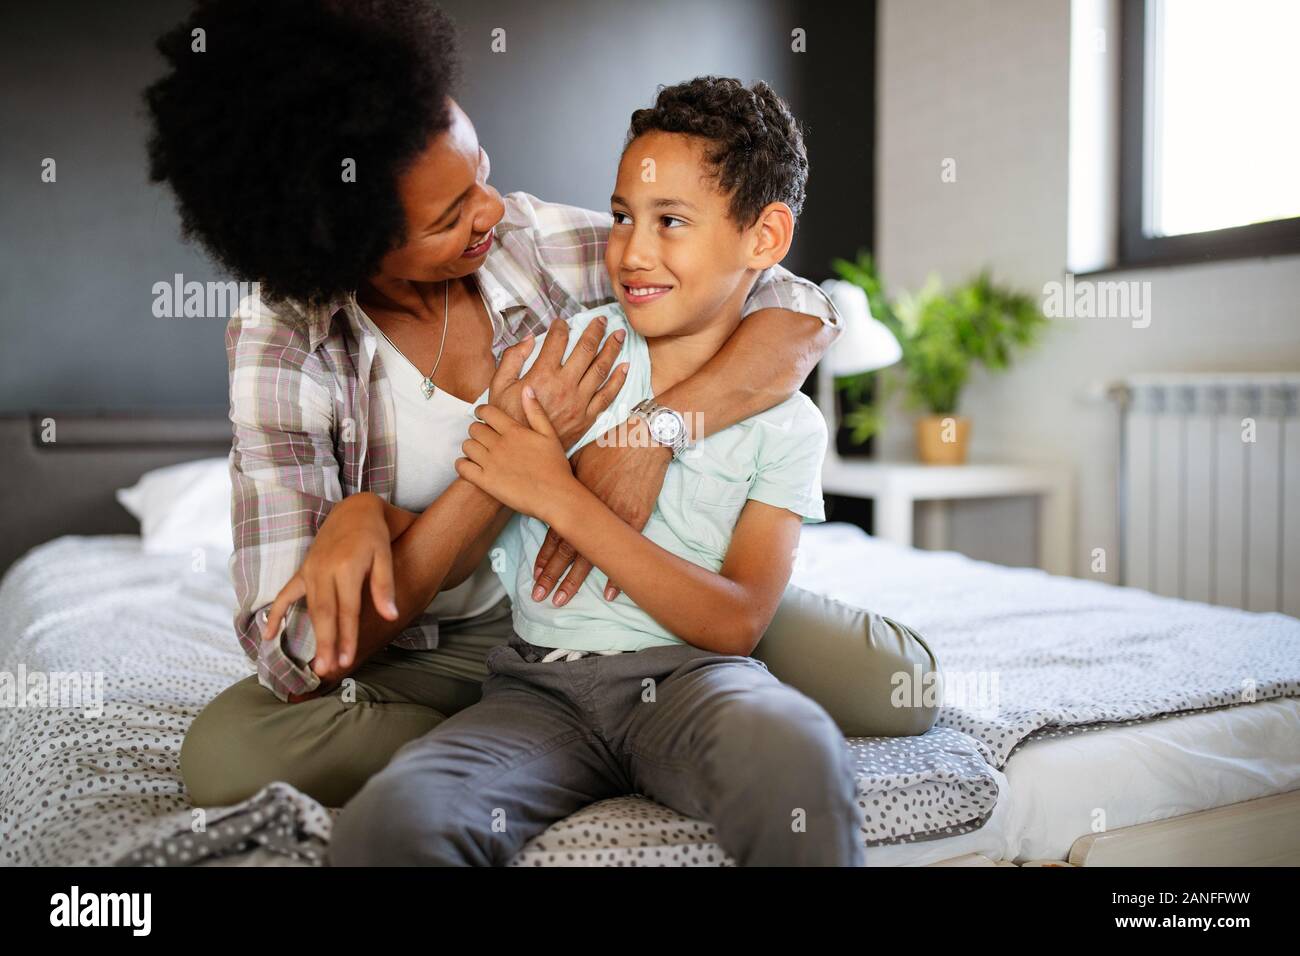 Mother playing bonding hugging with her son. Happy family time. Stock Photo